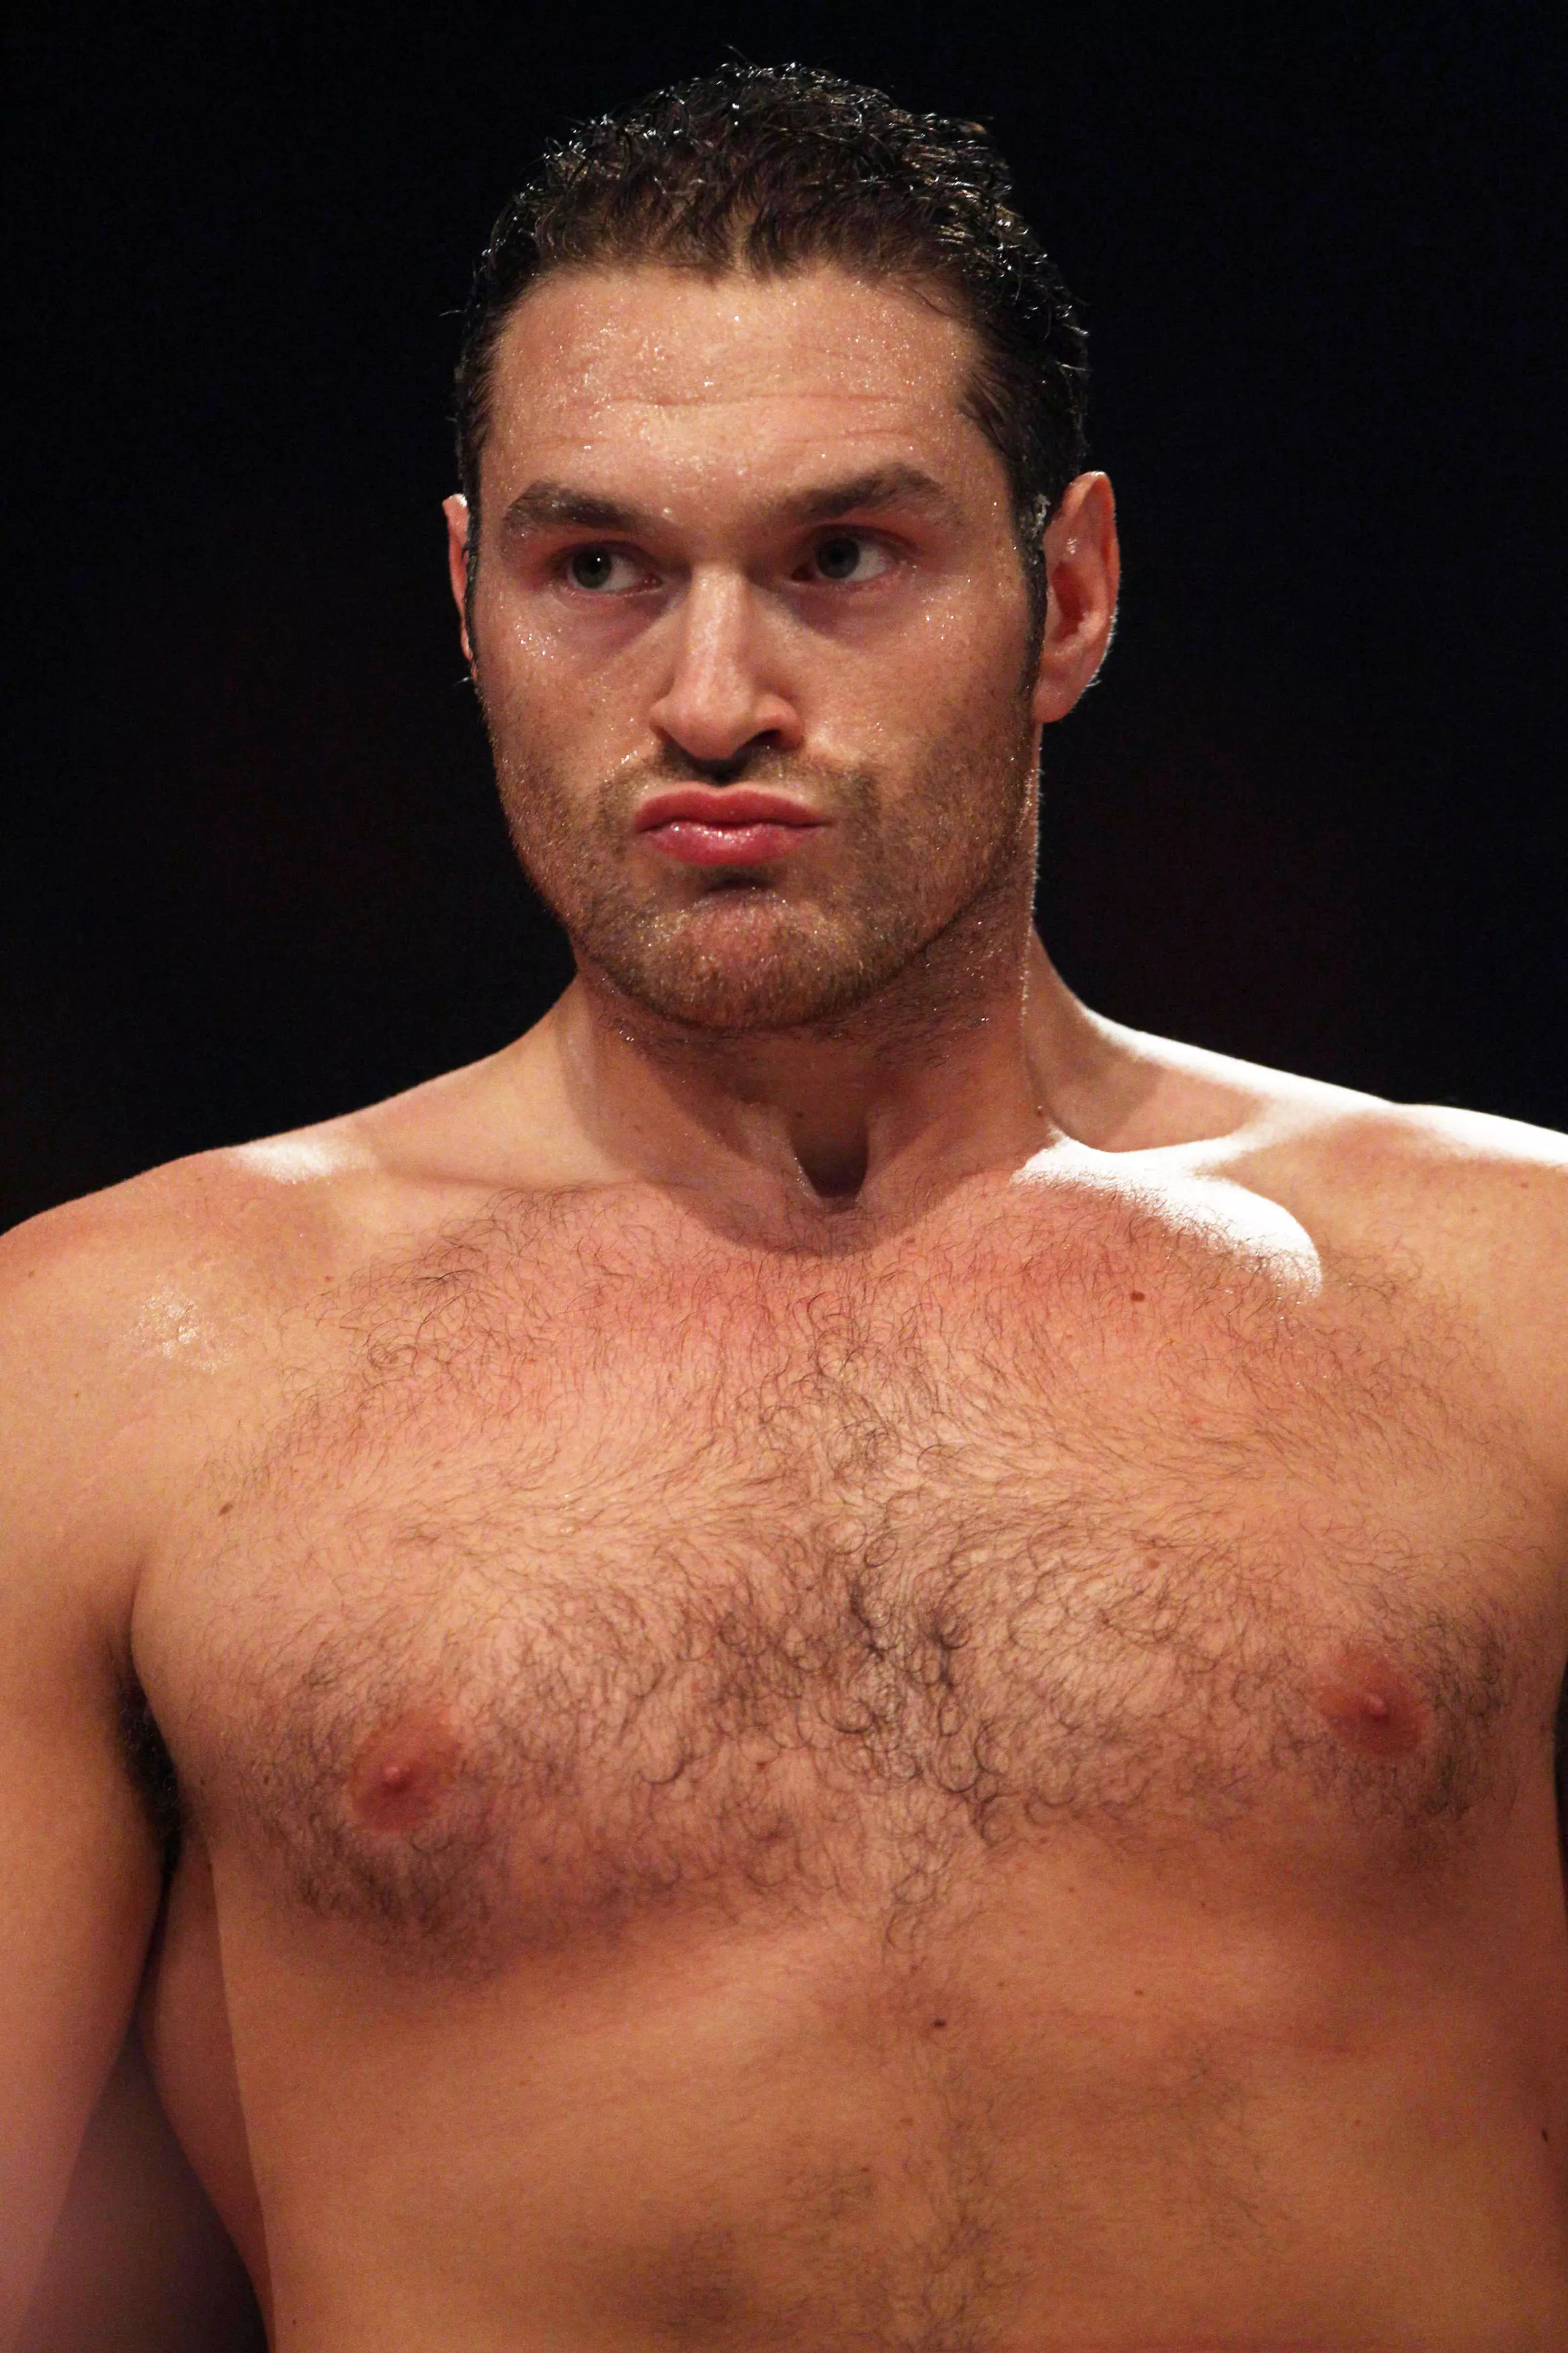 Tyson Fury said he has turned down the offer of a free hair transplant.